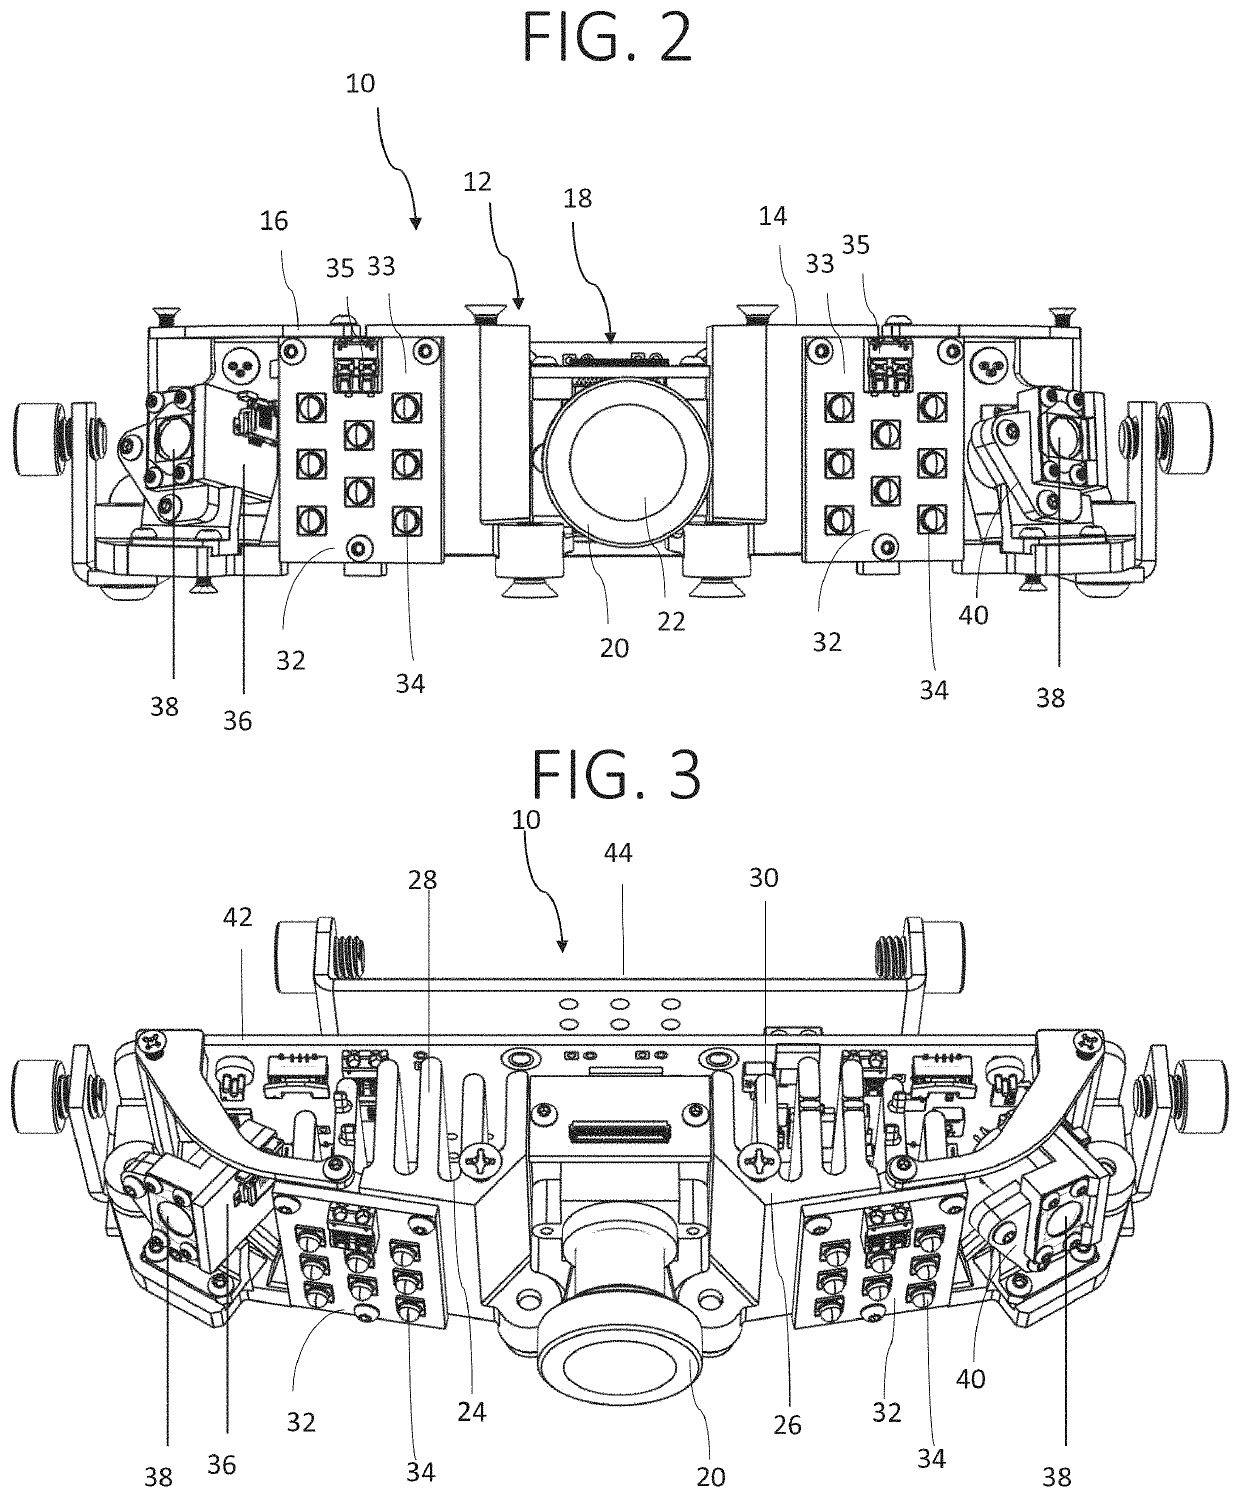 Device for monitoring vehicle occupant(s)